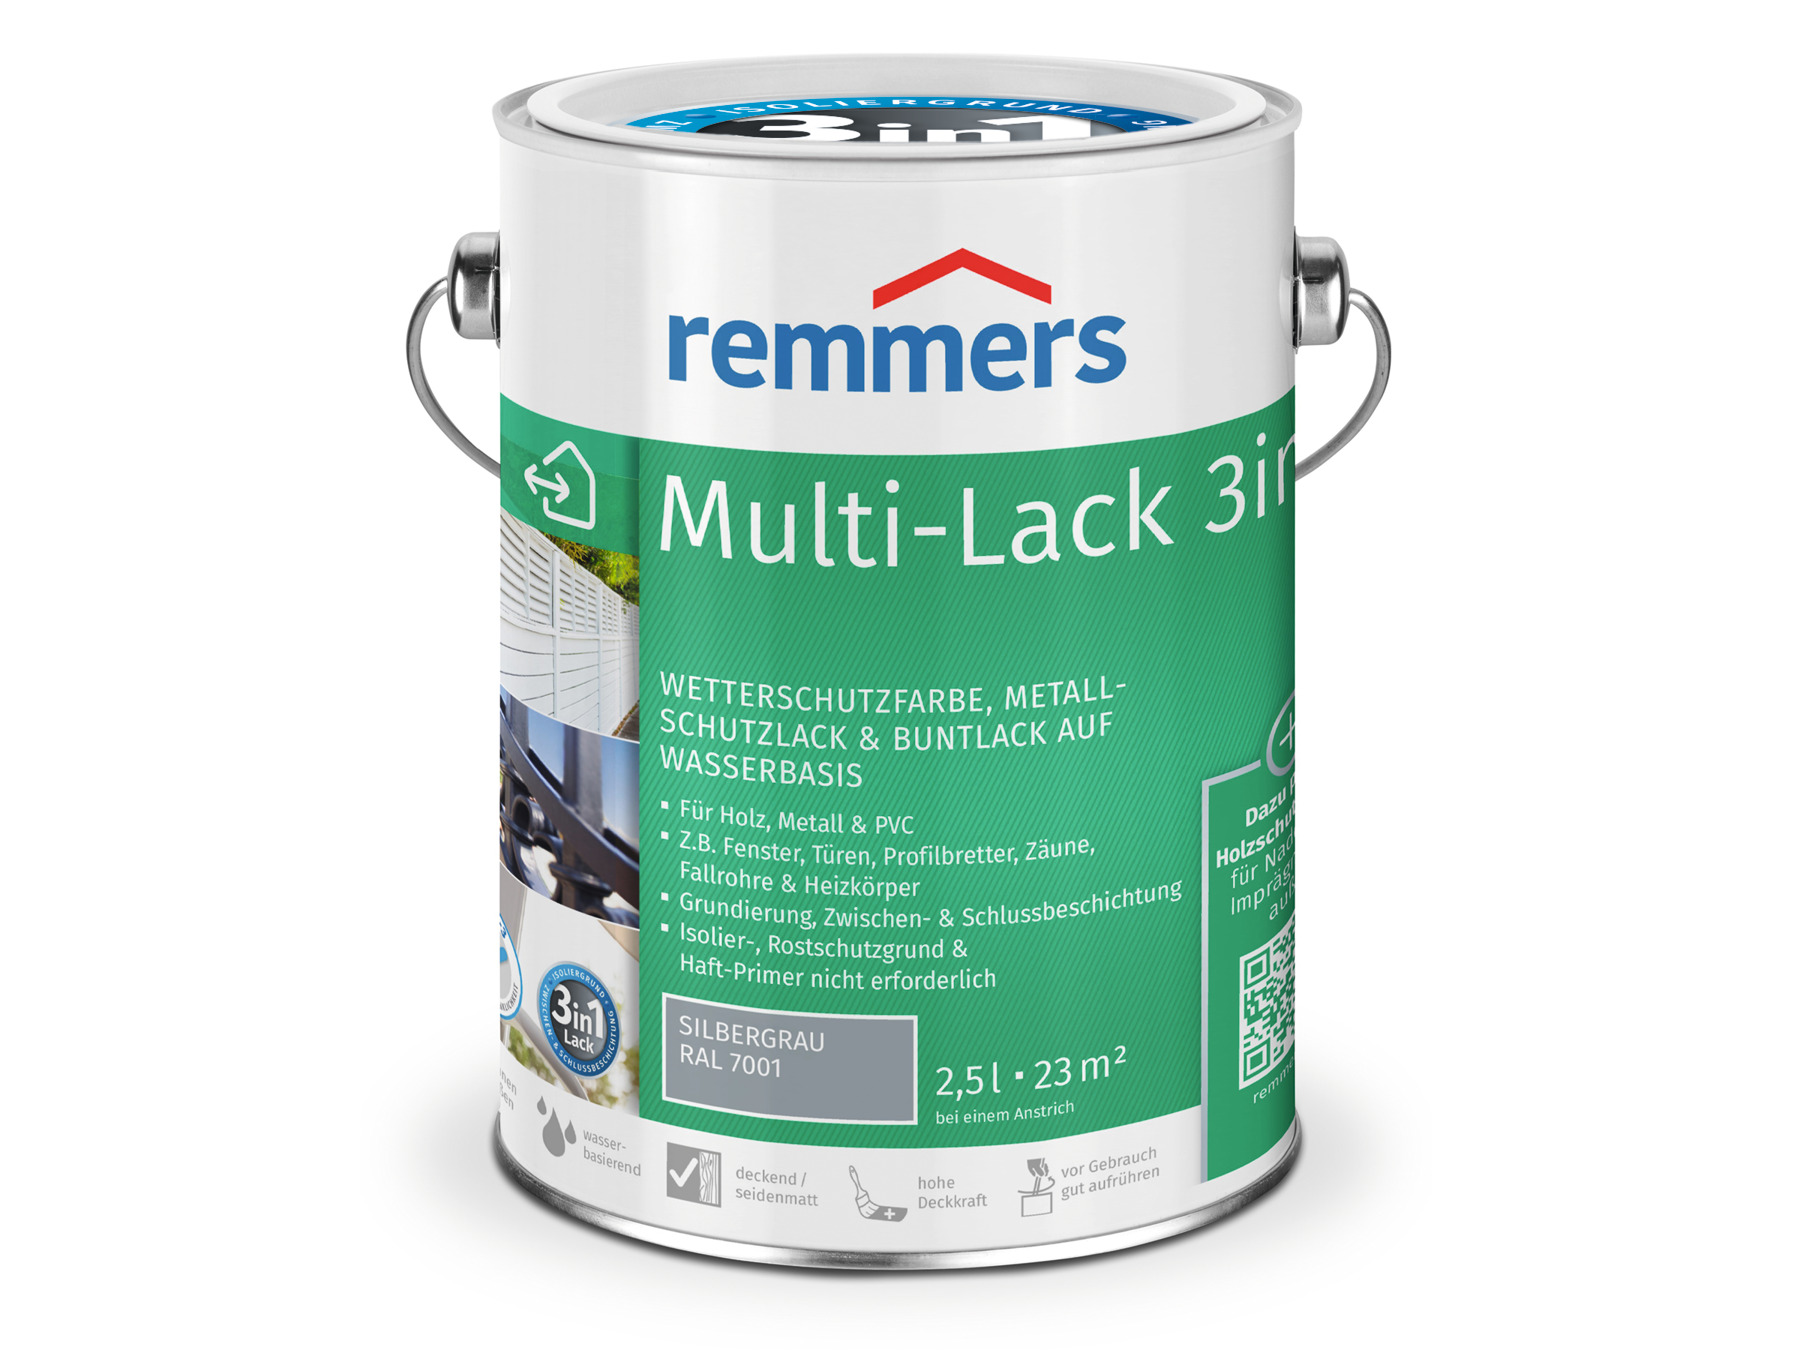 Remmers GmbH Multi-Isolierlack 3in1